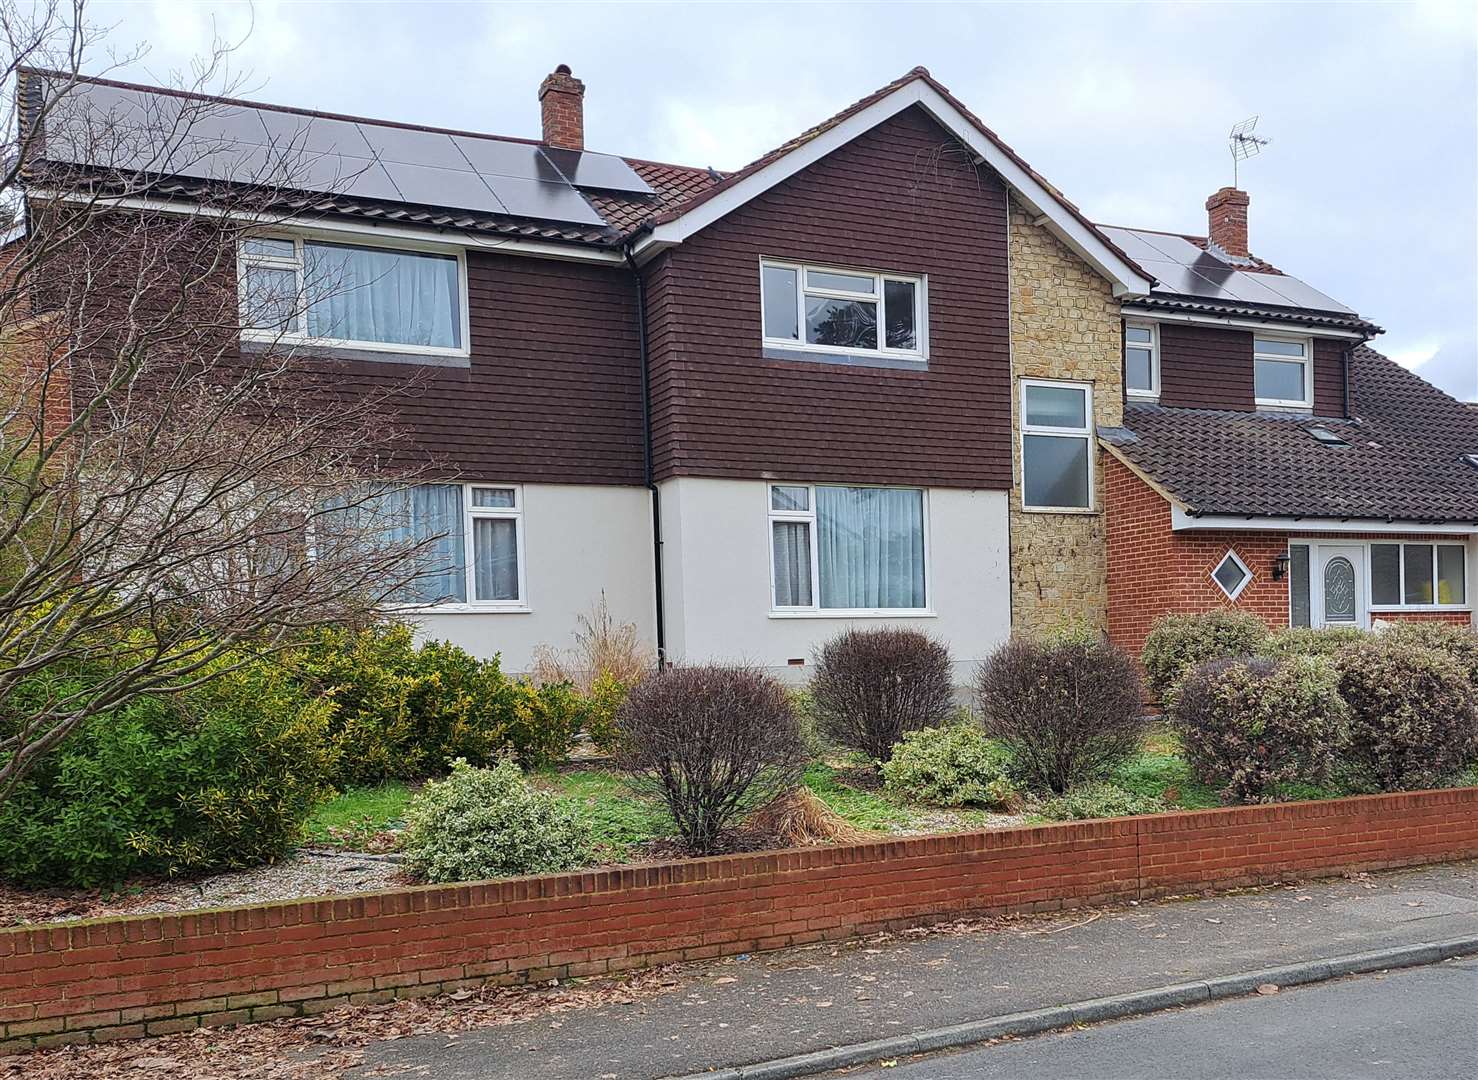 The home in Trapham Road, Allington, is up for conversion to an HMO